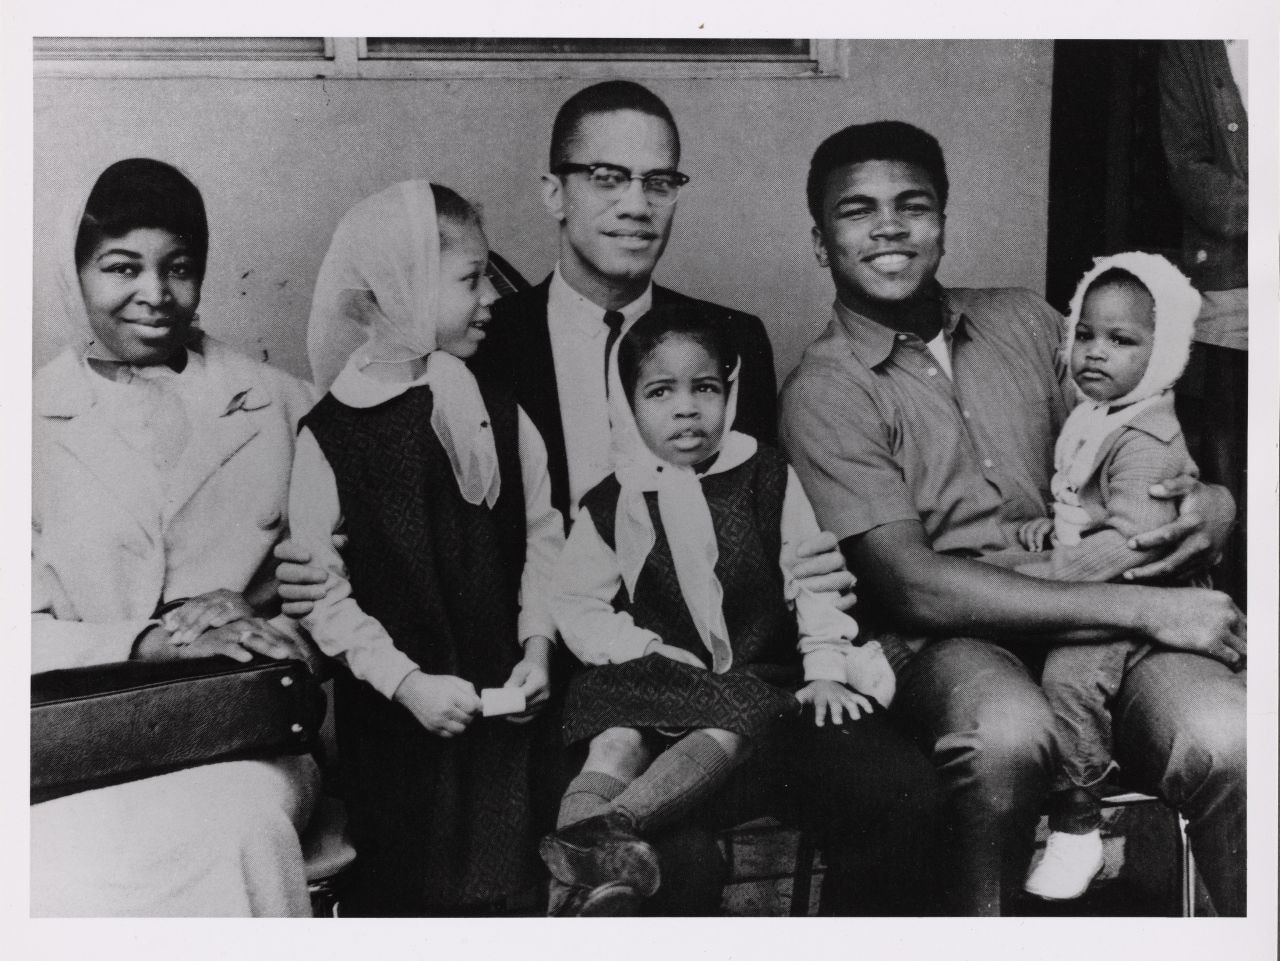 Malcolm X and Muhammad Ali (far right) in a still from 'Blood Brothers: Malcolm X & Muhammad Ali' (Image: Netflix)